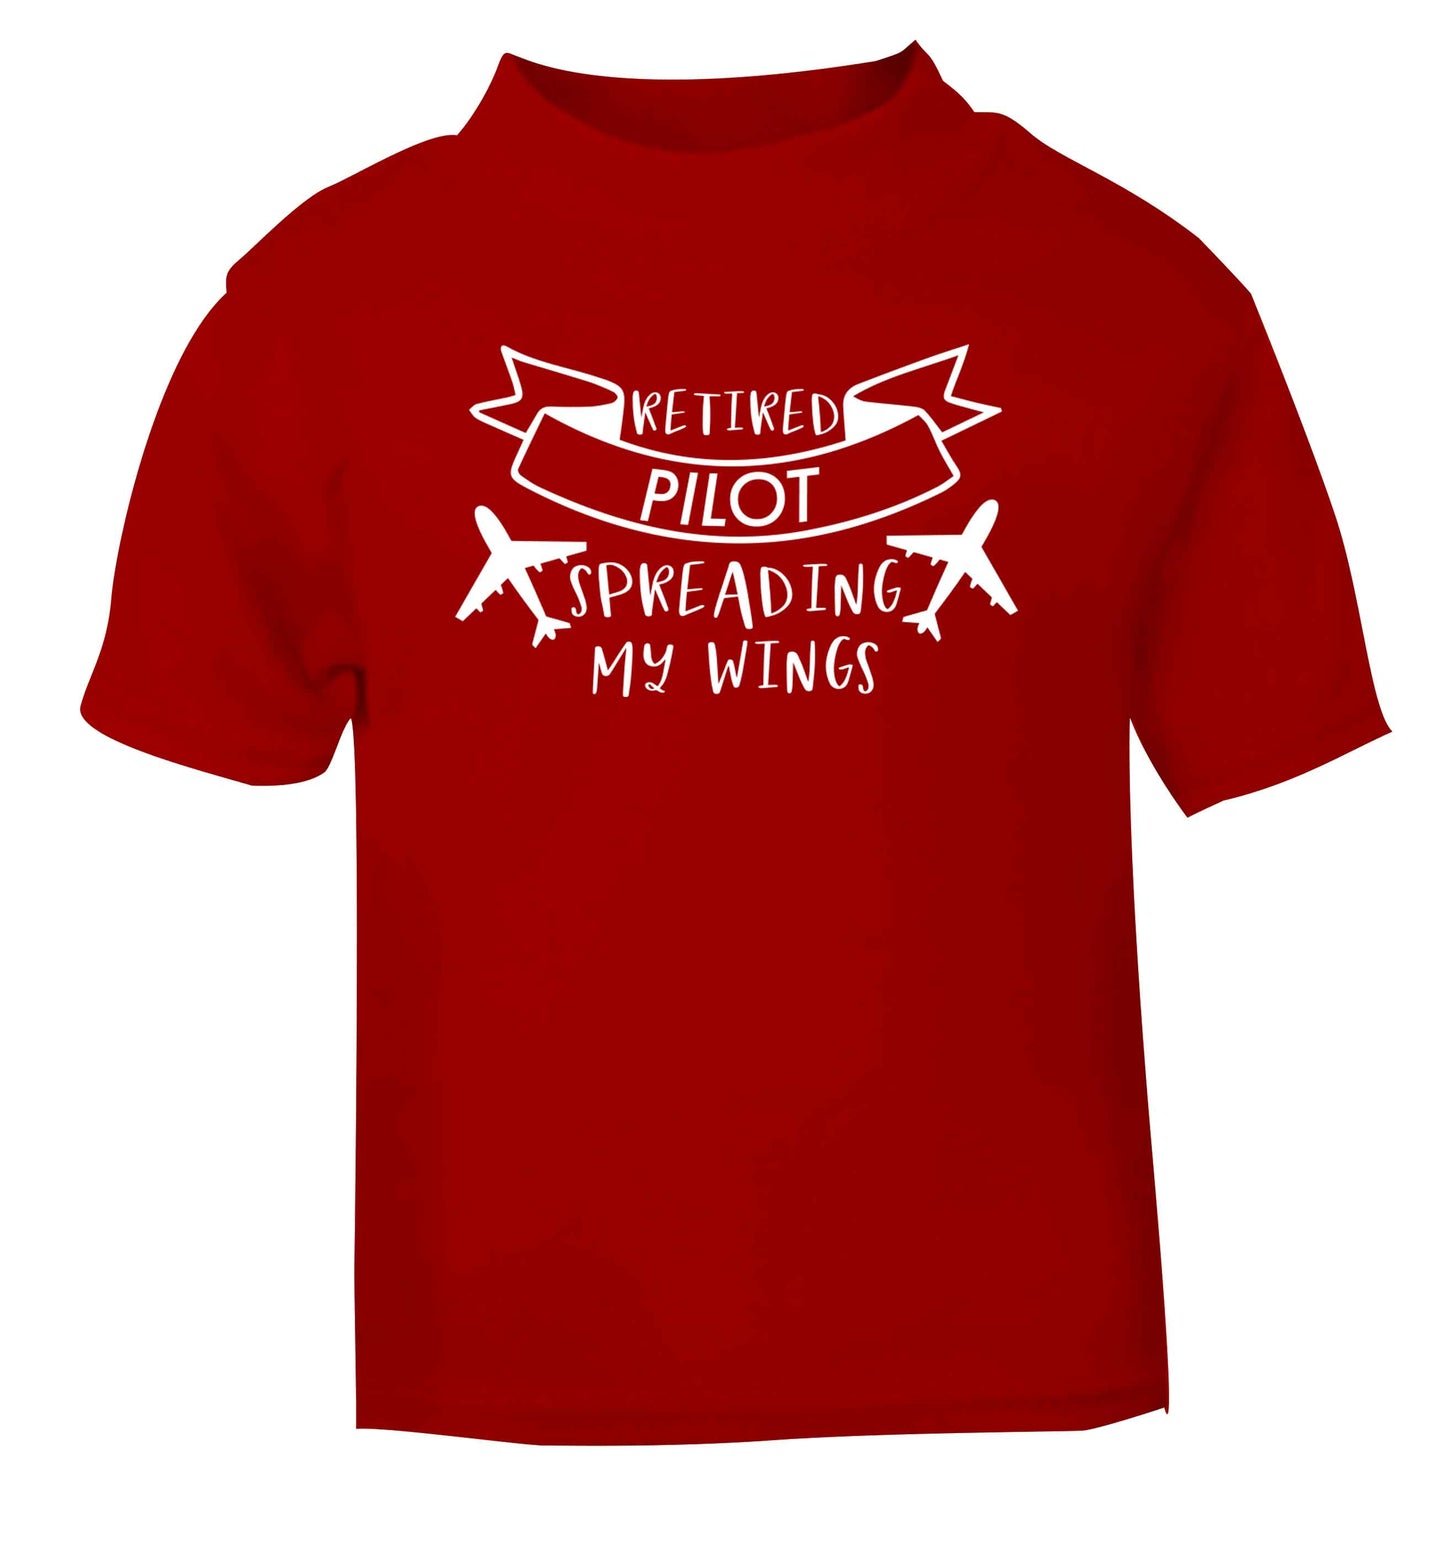 Retired pilot spreading my wings red Baby Toddler Tshirt 2 Years